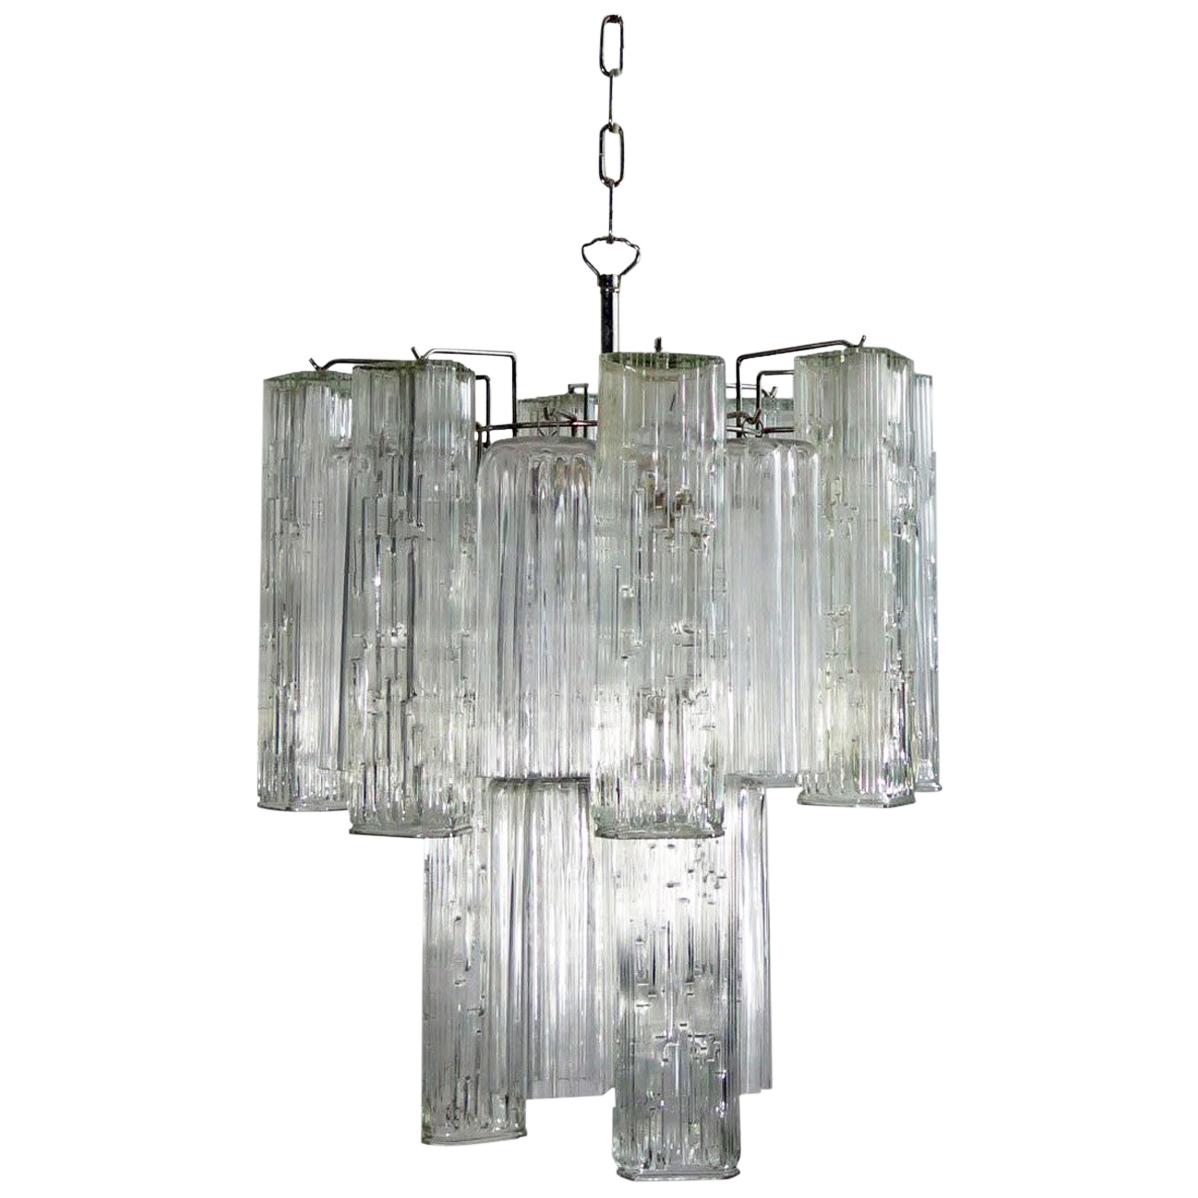 Attributed Murano Glass Chandelier Made in Italy For Sale